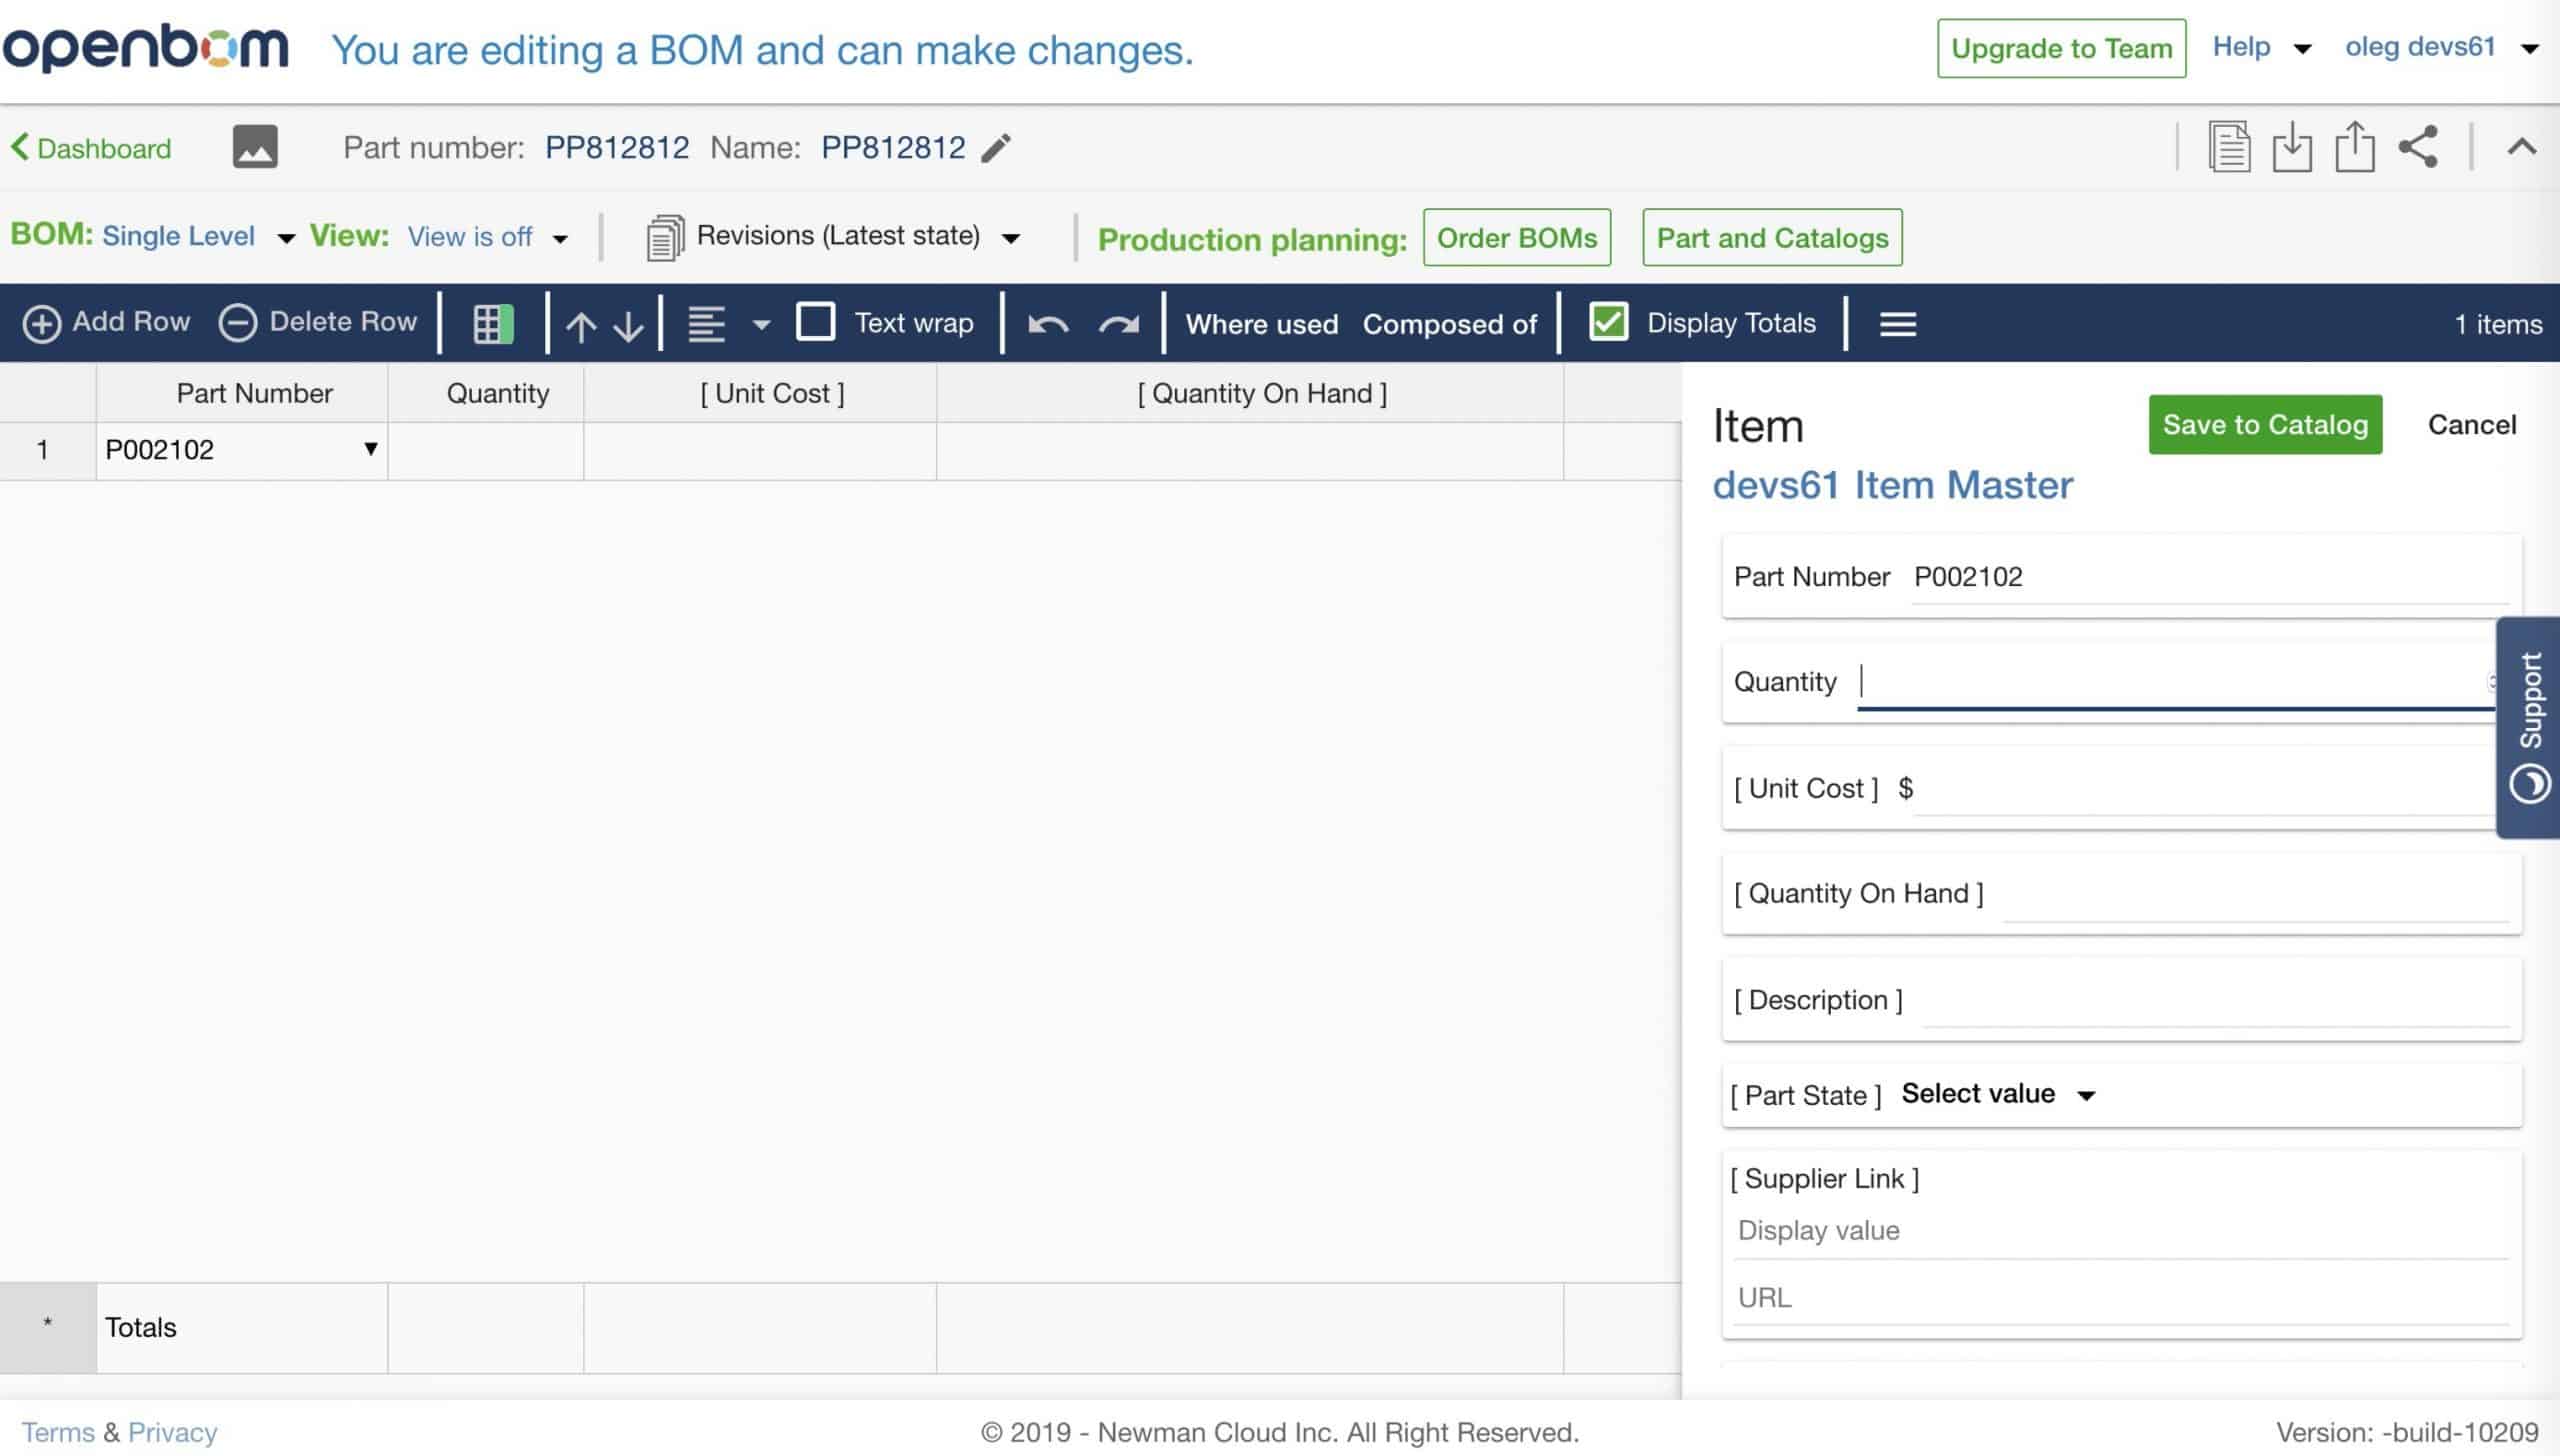 First Preview of OpenBOM New Item User Experience